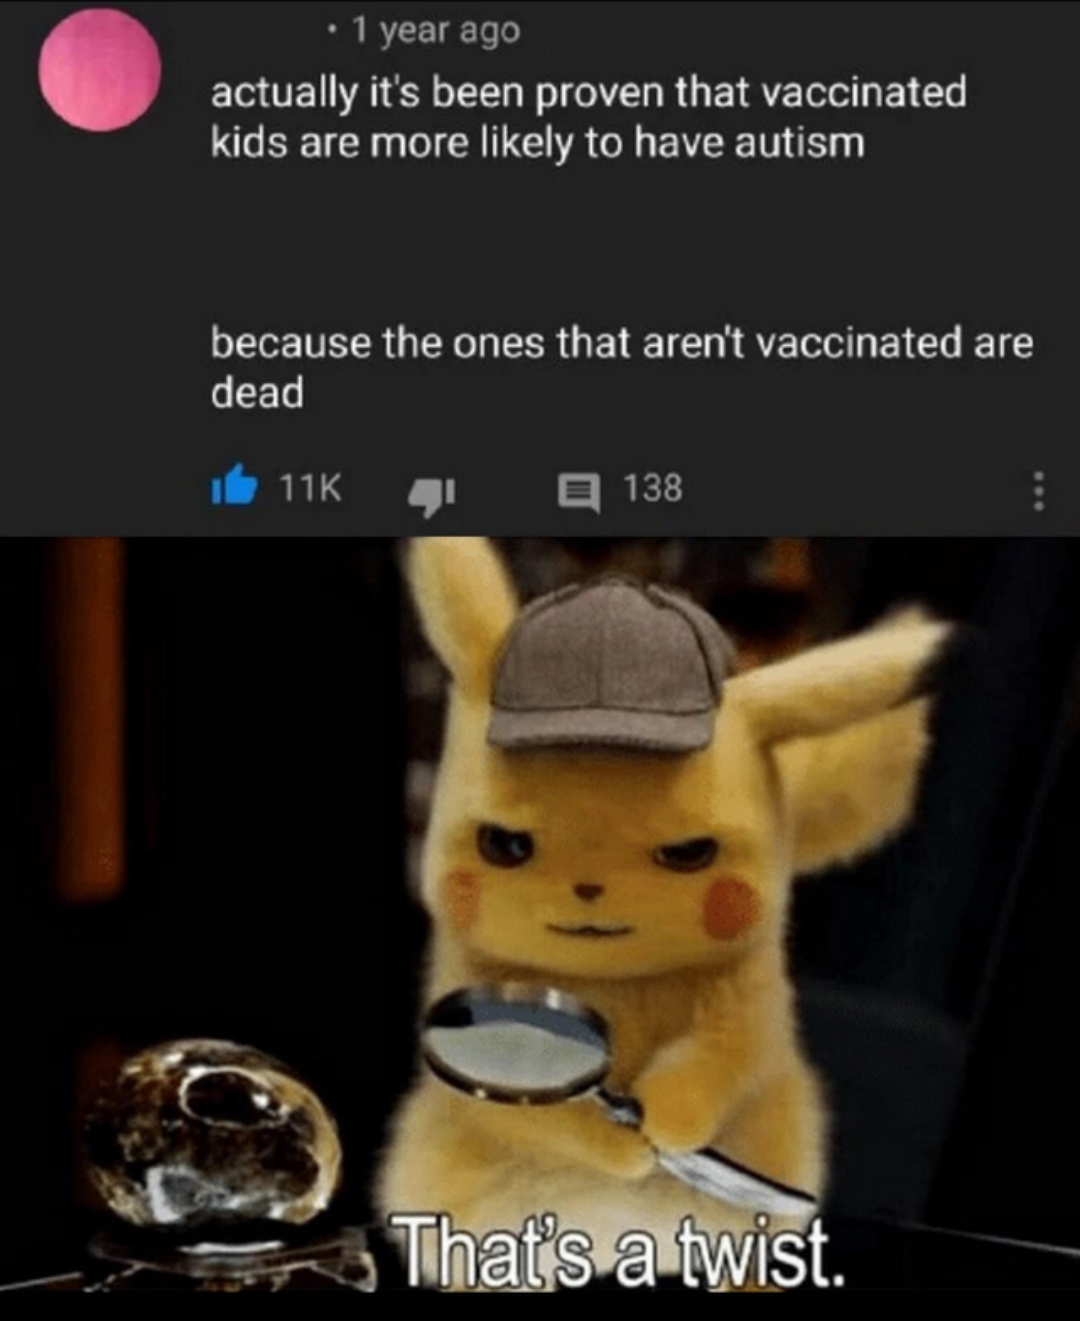 pokemon sword and shield memes - 1 year ago actually it's been proven that vaccinated kids are more ly to have autism because the ones that aren't vaccinated are dead 116 138 That's a twist.